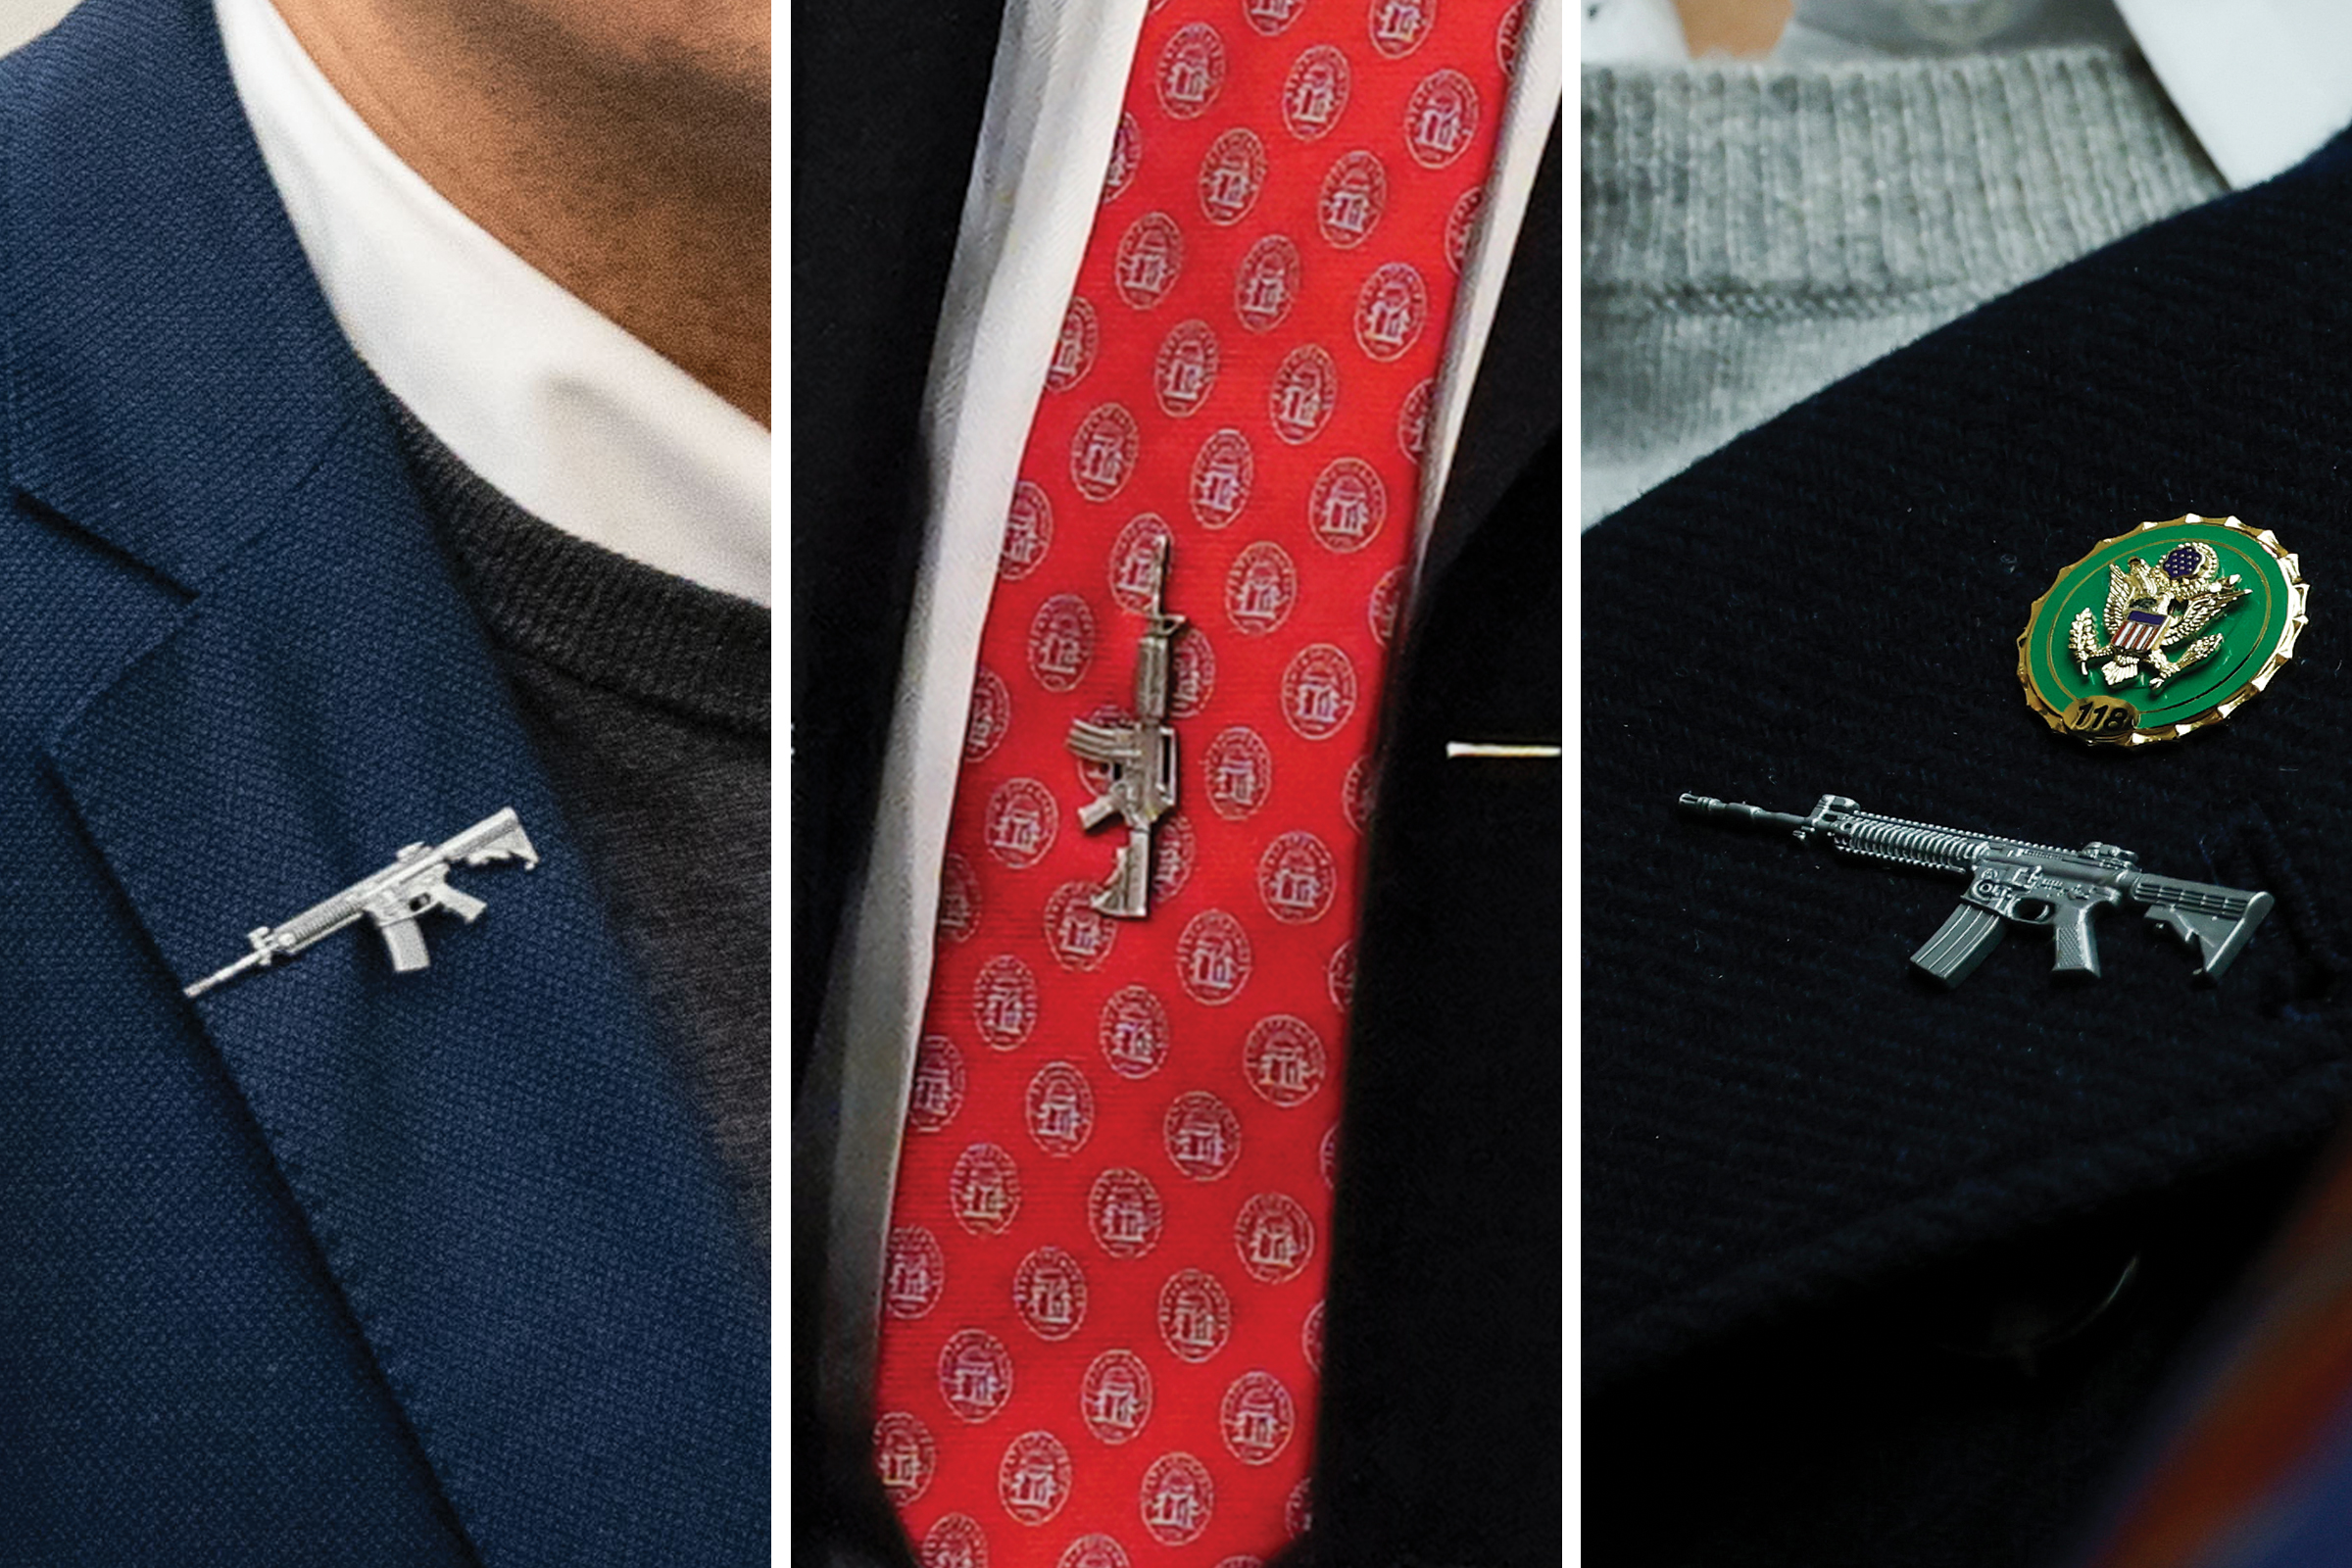 Republicans have been seen wearing AR-15 pins to show their support for the Second Amendment. (L: Kent Nishimura—Los Angeles Times/Getty Images; C: Alex Brandon—AP; R: Anna Moneymaker—Getty Images)